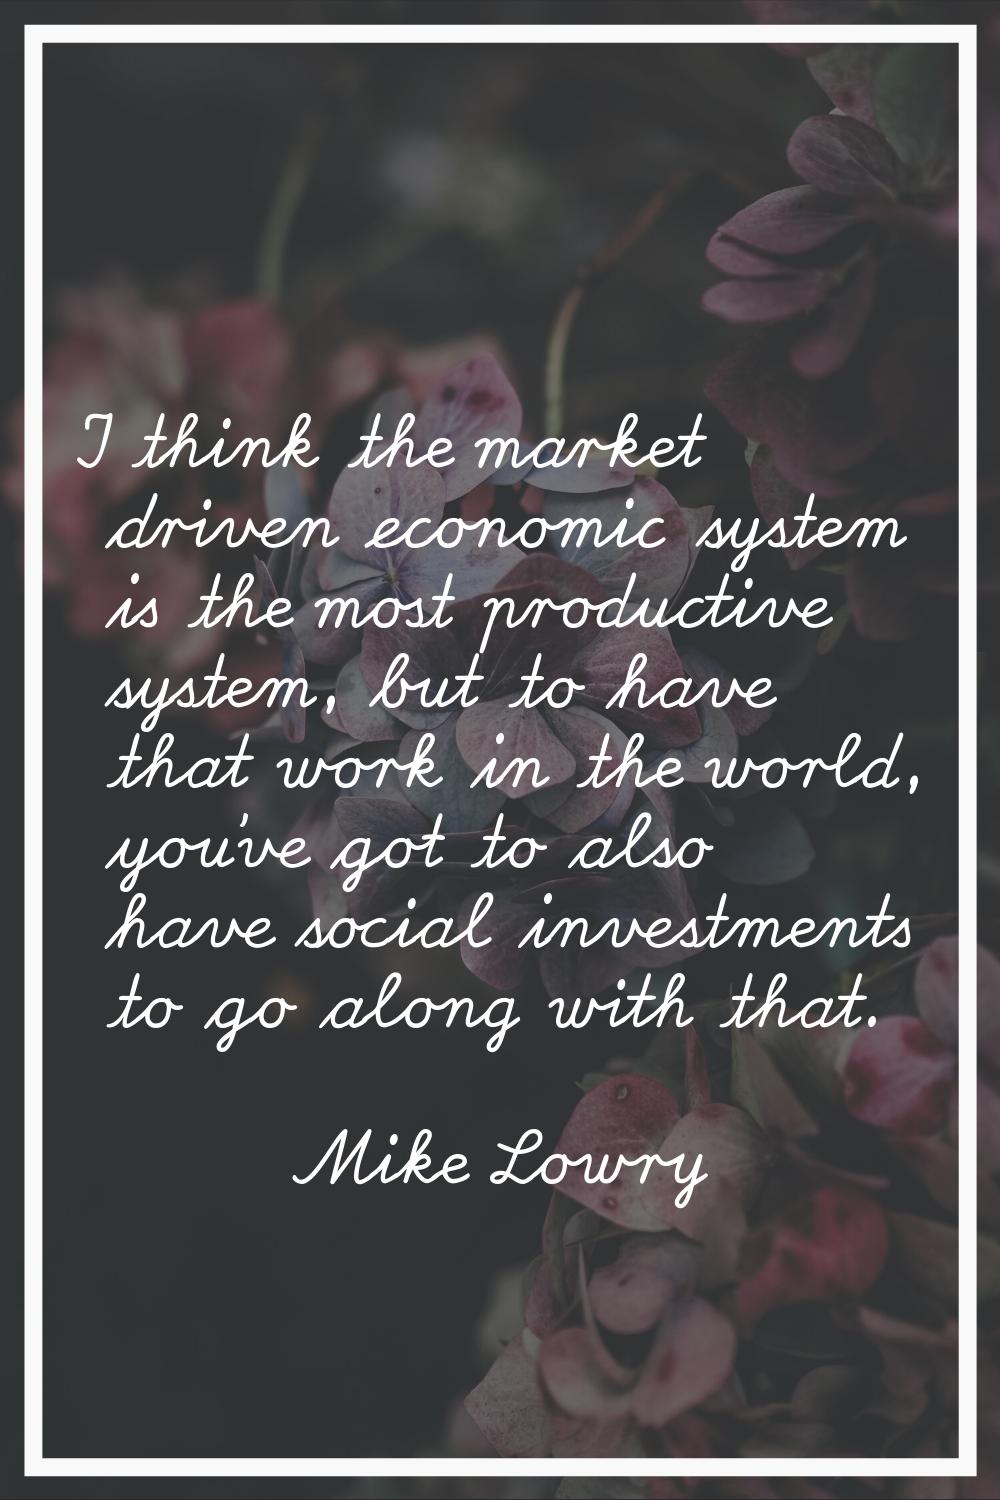 I think the market driven economic system is the most productive system, but to have that work in t